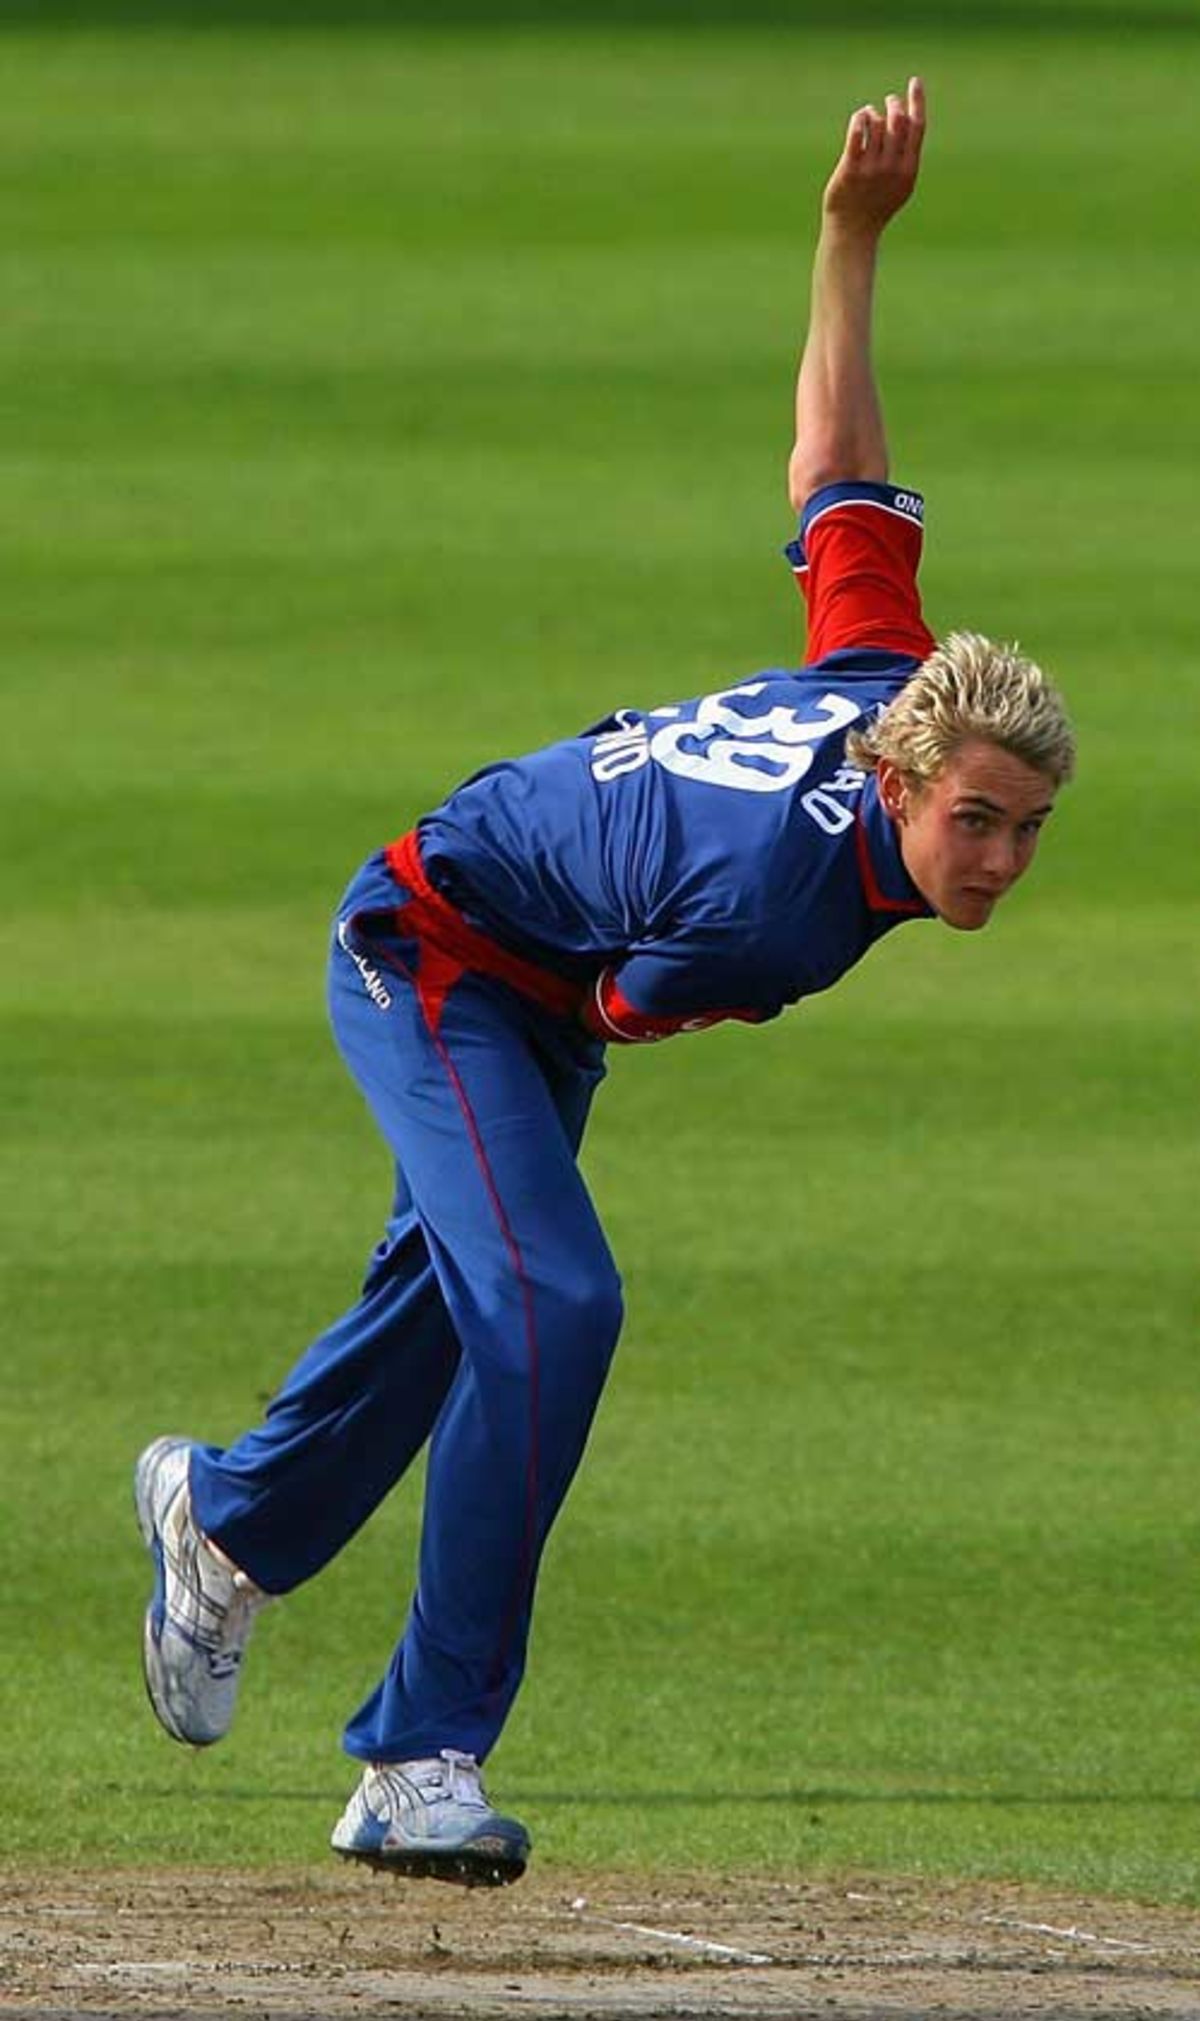 Stuart Broad was expensive against West Indies but collected a late wicket, England Lions v West Indians, New Road, June 21, 2007